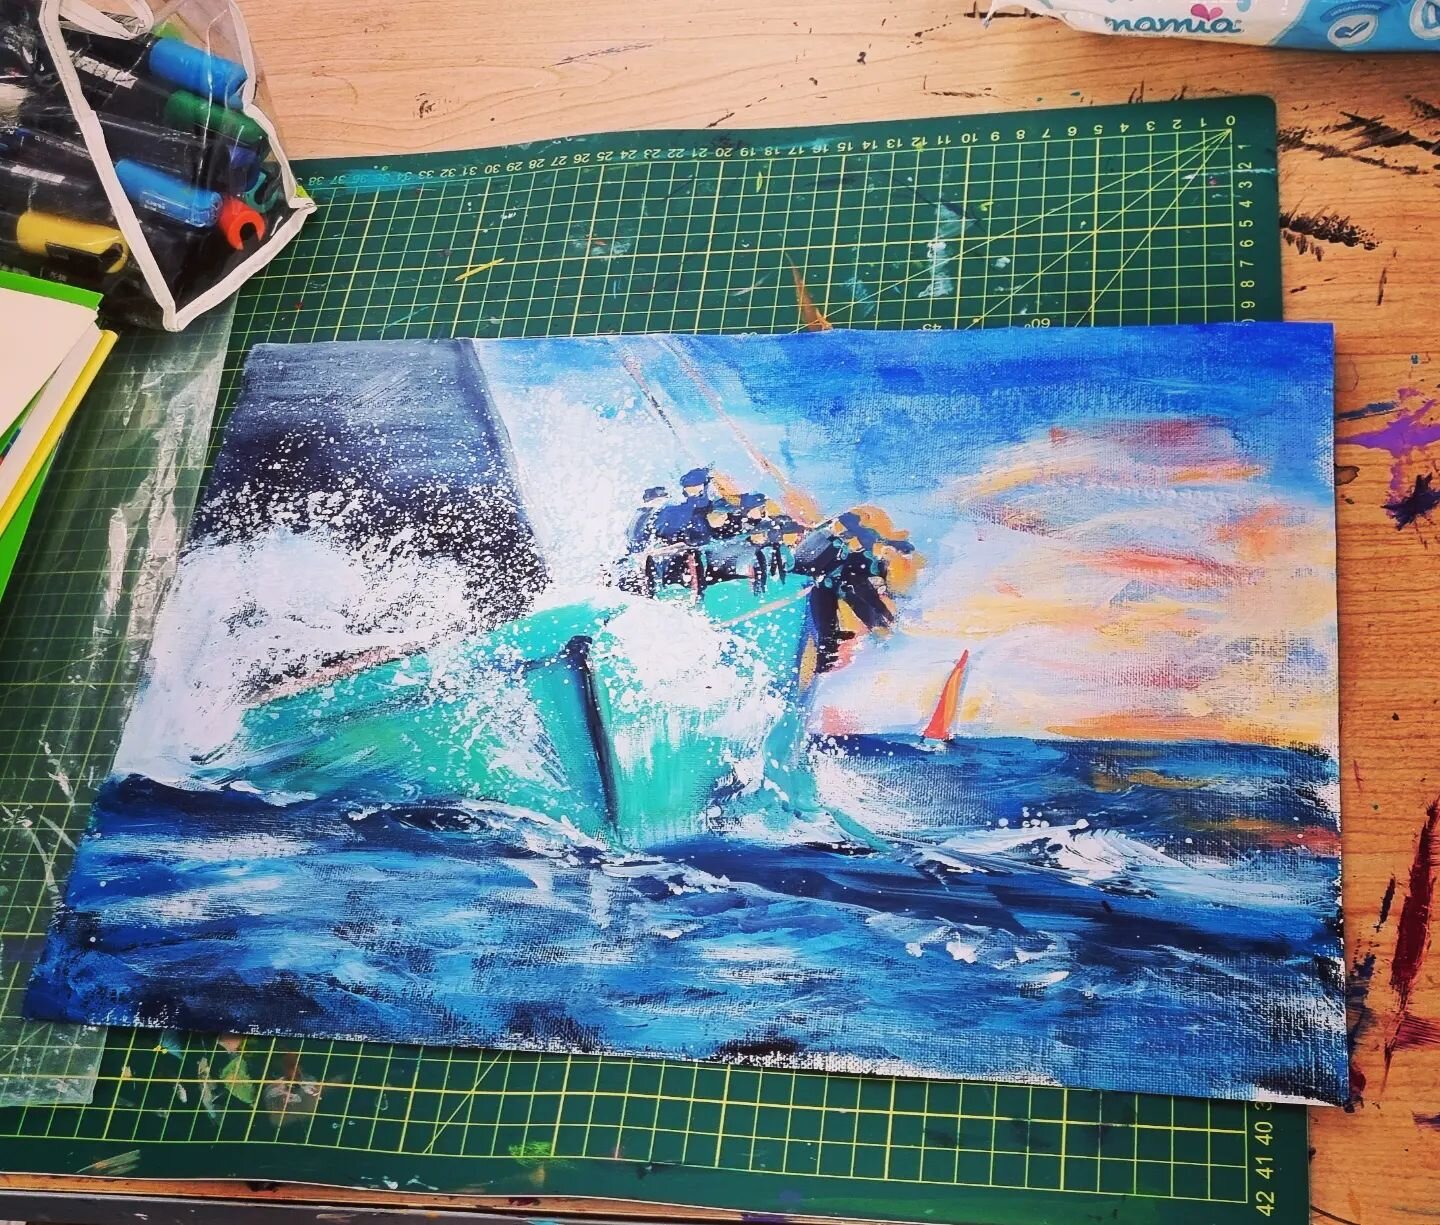 Colour study for a commission in Perth Western Australia 

Sailing!!! Racing. Don't mind the spray. Hold tight as we sweep across the ocean with the oncoming night. 

The foamy seas batter the hull.  Drenching the crew. In the distance a yacht sails 